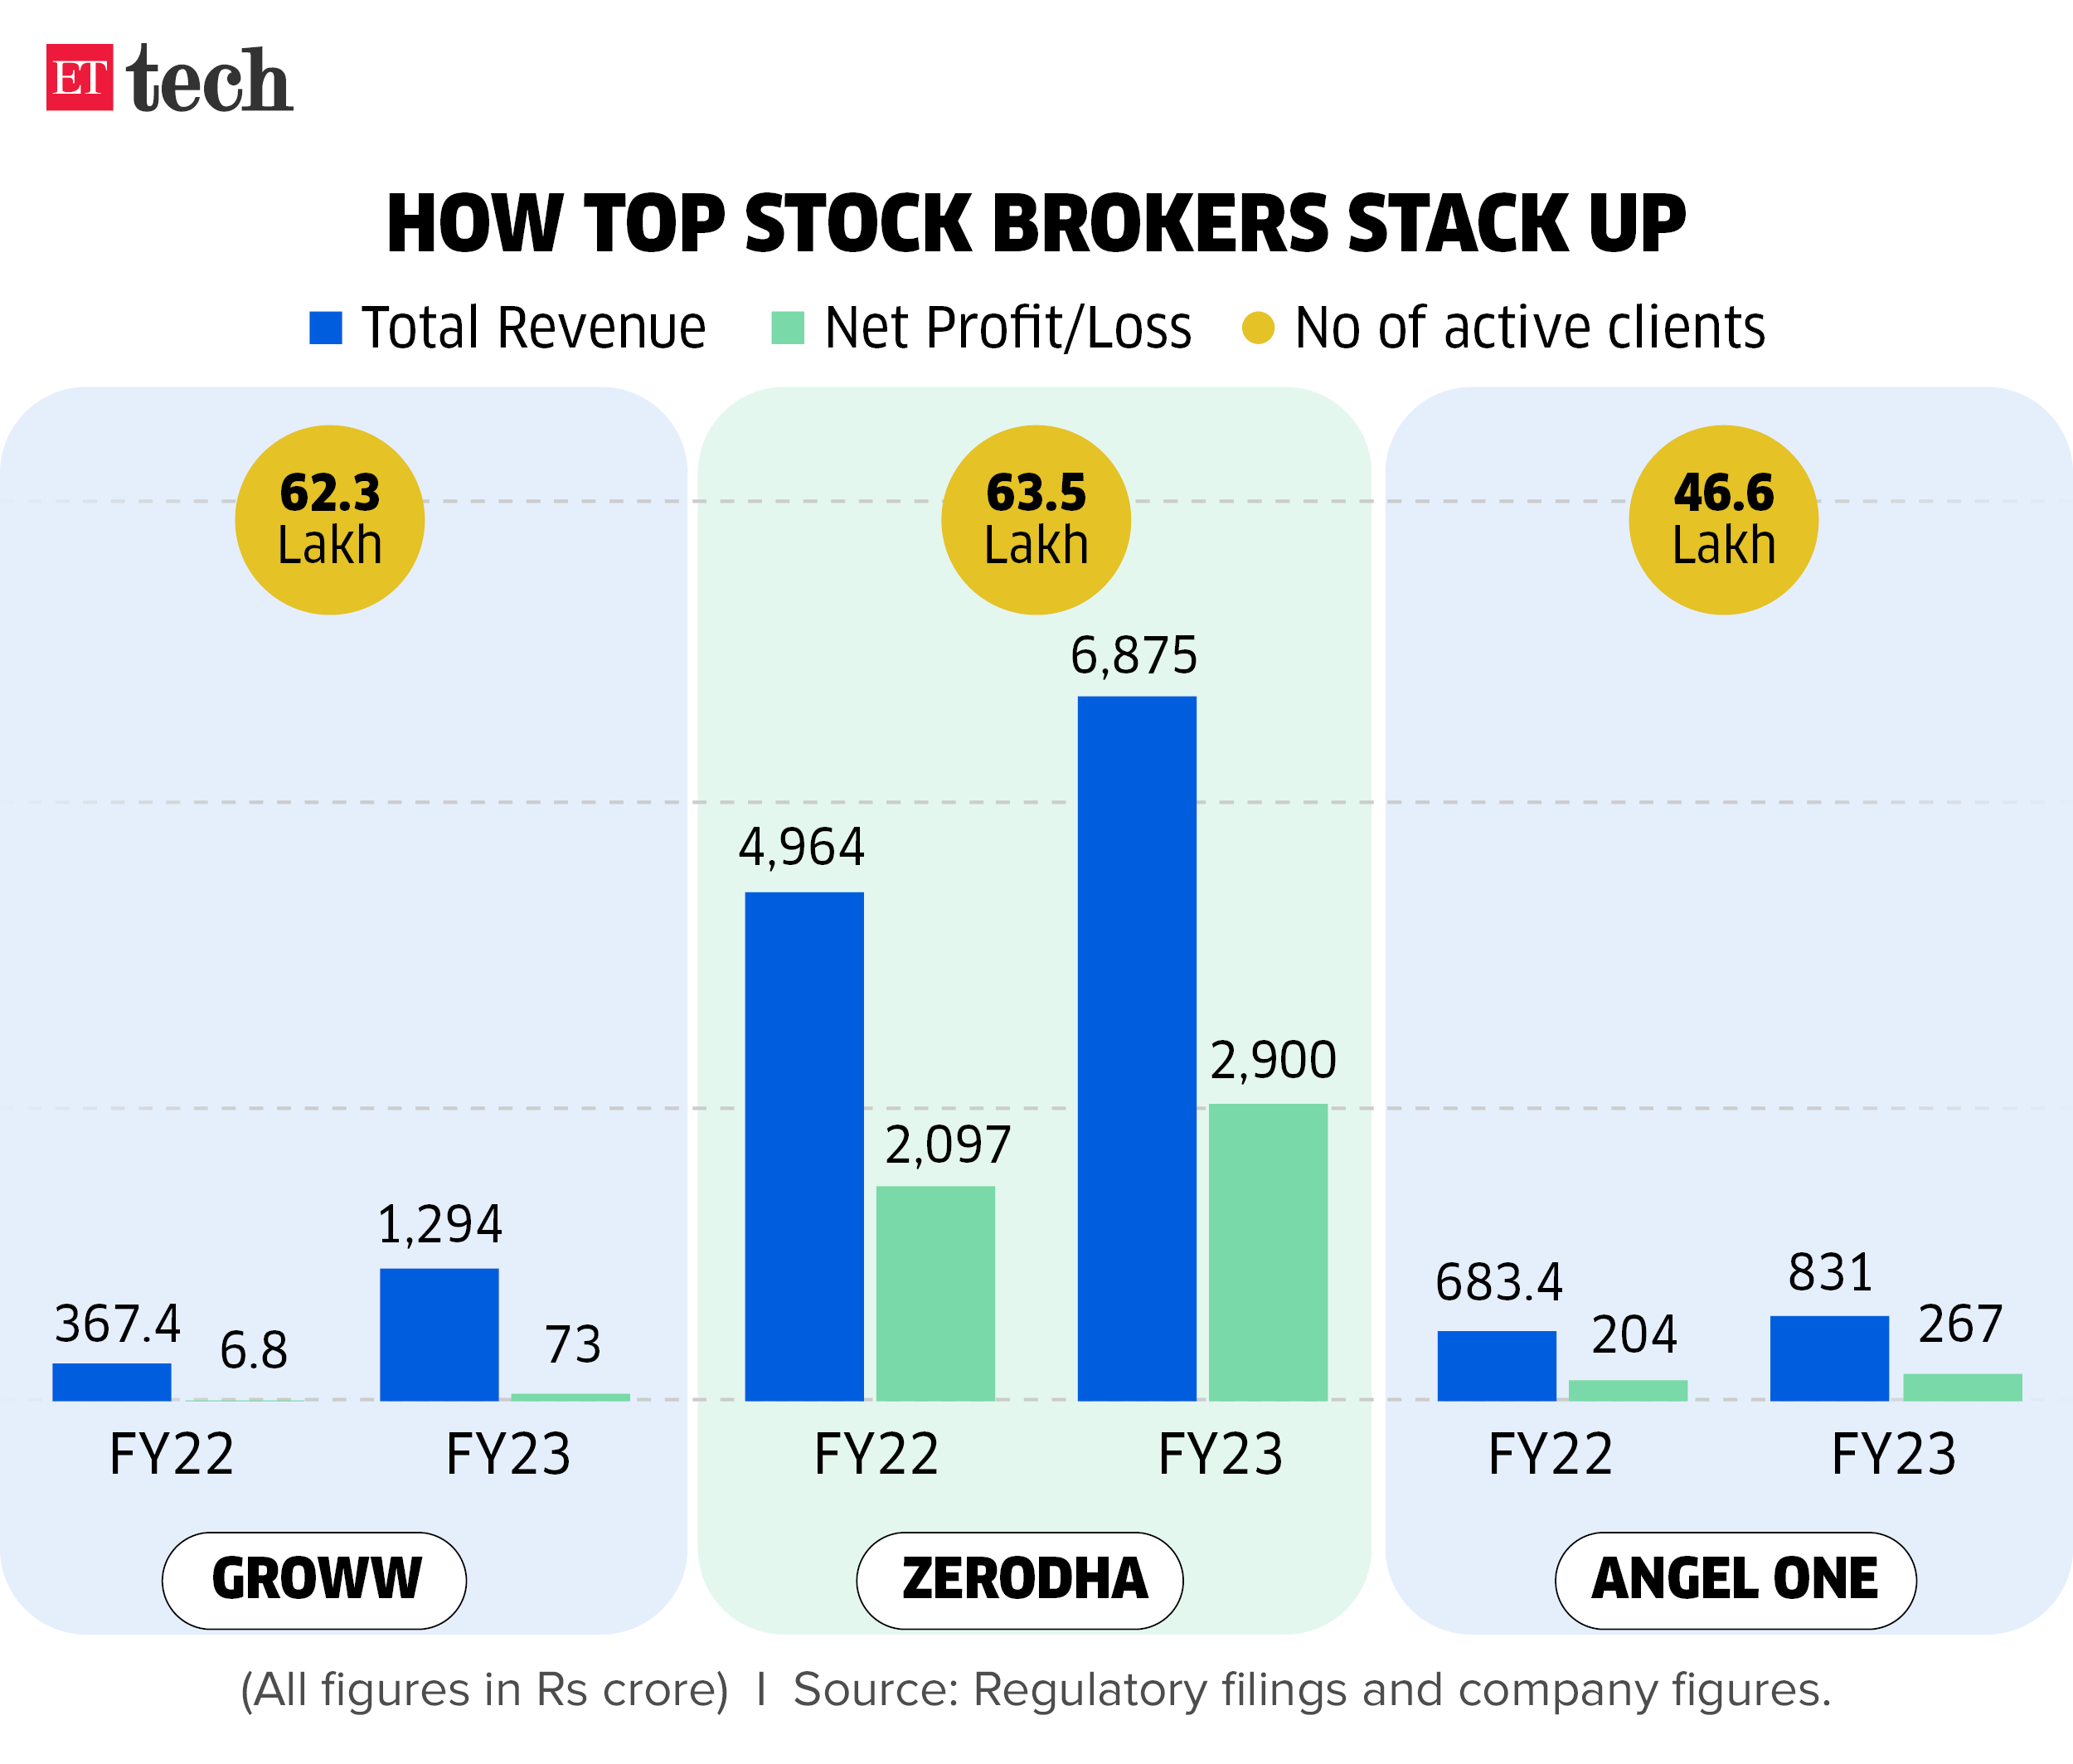 HOW TOP STOCK BROKERS STACK Up